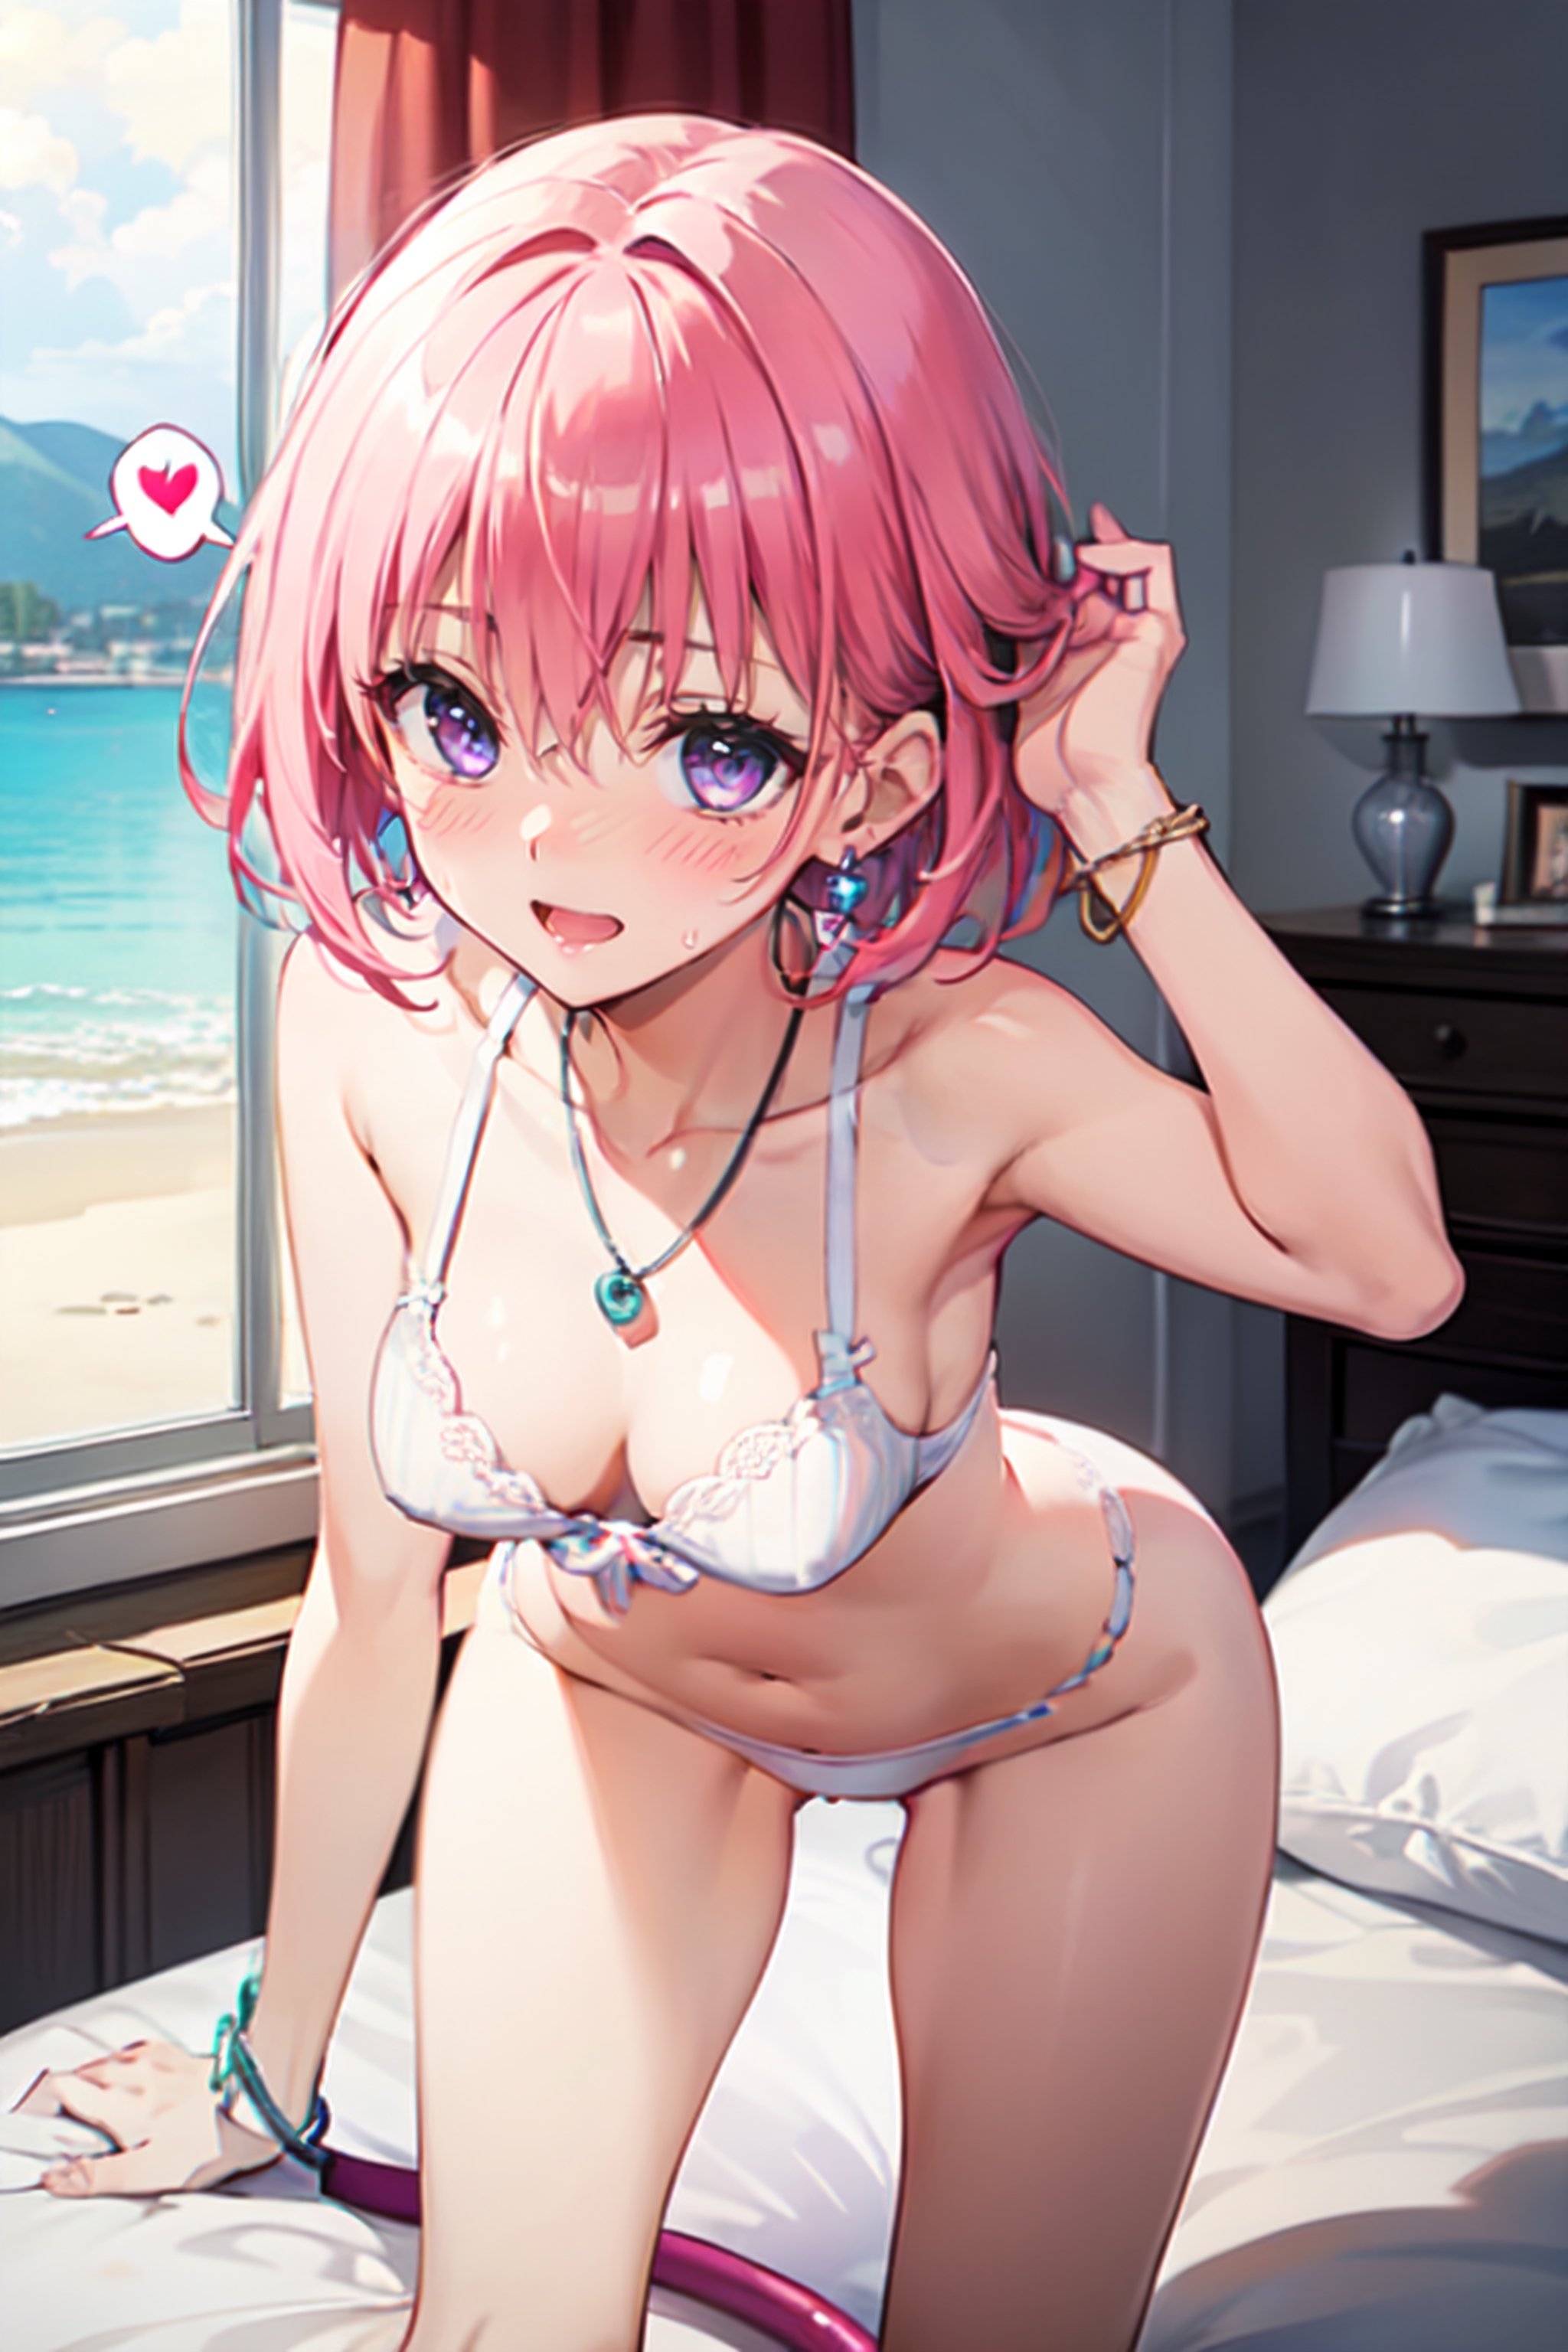 best quality, masterpiece, (realistic:1.2), 1 girl, detailed face, beautiful eyes, (She is wearing a underwear. having fun on the bed). She looks very happy playing on the bed. She accessorized with a medium, silver bracelet on her wrist. While playing, the girl was drawn in by the colorful and glittering scenery of the hotel. She is wearing cute heart-shaped earrings and a matching necklace and smiling in the bright sun, (extremely detailed nipple), (spoken heart), (upturned eyes),((pov)),(embarrassed:1.2), {{{{8k wallpaper}}}},
{{{{extremely detailed eyes}}}},
{{{{extremely detailed body}}}},
{{{{extremely detailed finger}}}},(((best quality))), ((official art:1.2)), (best anatomy), solo, 1girl, (kawaii), (five digits), (speculum), (4k), (high resolution), ((thin waist)),(nabel),(Beautiful breasts),(beautiful leg:1.3),(skinny leg),(beautiful hands:1.2),(teats),(very slim),(slender:1.3),(ribbed),(skinny limbs),(beautiful vagina:1.3),(beautidful eyes:1.1), (((Beautiful face:1.3))),(best quality:1.1), (masterpiece:1.4), (absurdres:1.0), portrait, close up,1girl, bob cut, medium hair ,pink hair, bob cut,purple eyes, ((((big breasts)))), (blush:1.2), ((small hip)), medium hair, pink hair, disheveled hair,afterglow, (20 years old), be breathless,on bed,shamefaced, embarrassed, half-closed eye,self suck,deepthroat / cum / hands on another's head / pov hands / head grab,,penisface,penis_sheath,multiple penises,multiple boys,VACUUM FELLATIO,cameltoe,inniepussy1,spread\(vaginal\),pussy,SEX,spread pussy,doggystyle,TOP-DOWN BOTTOM-UP,sidedoggystyle